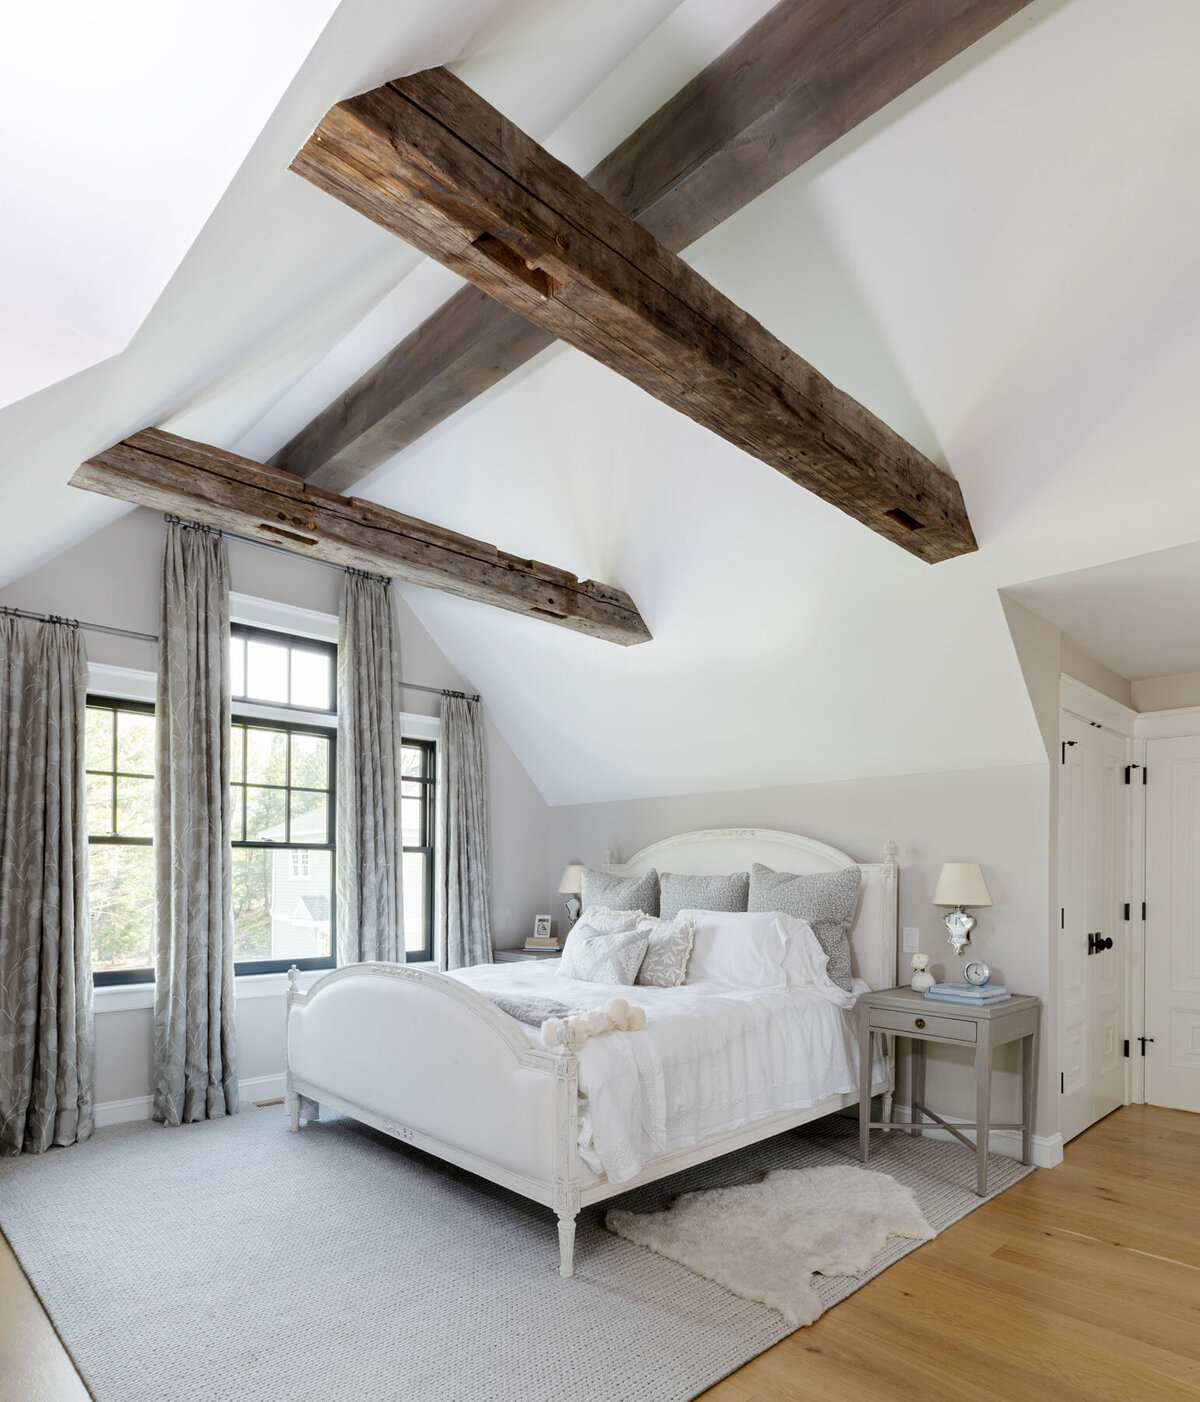 007-weathered-beam-vaulted-bedroom-ceiling